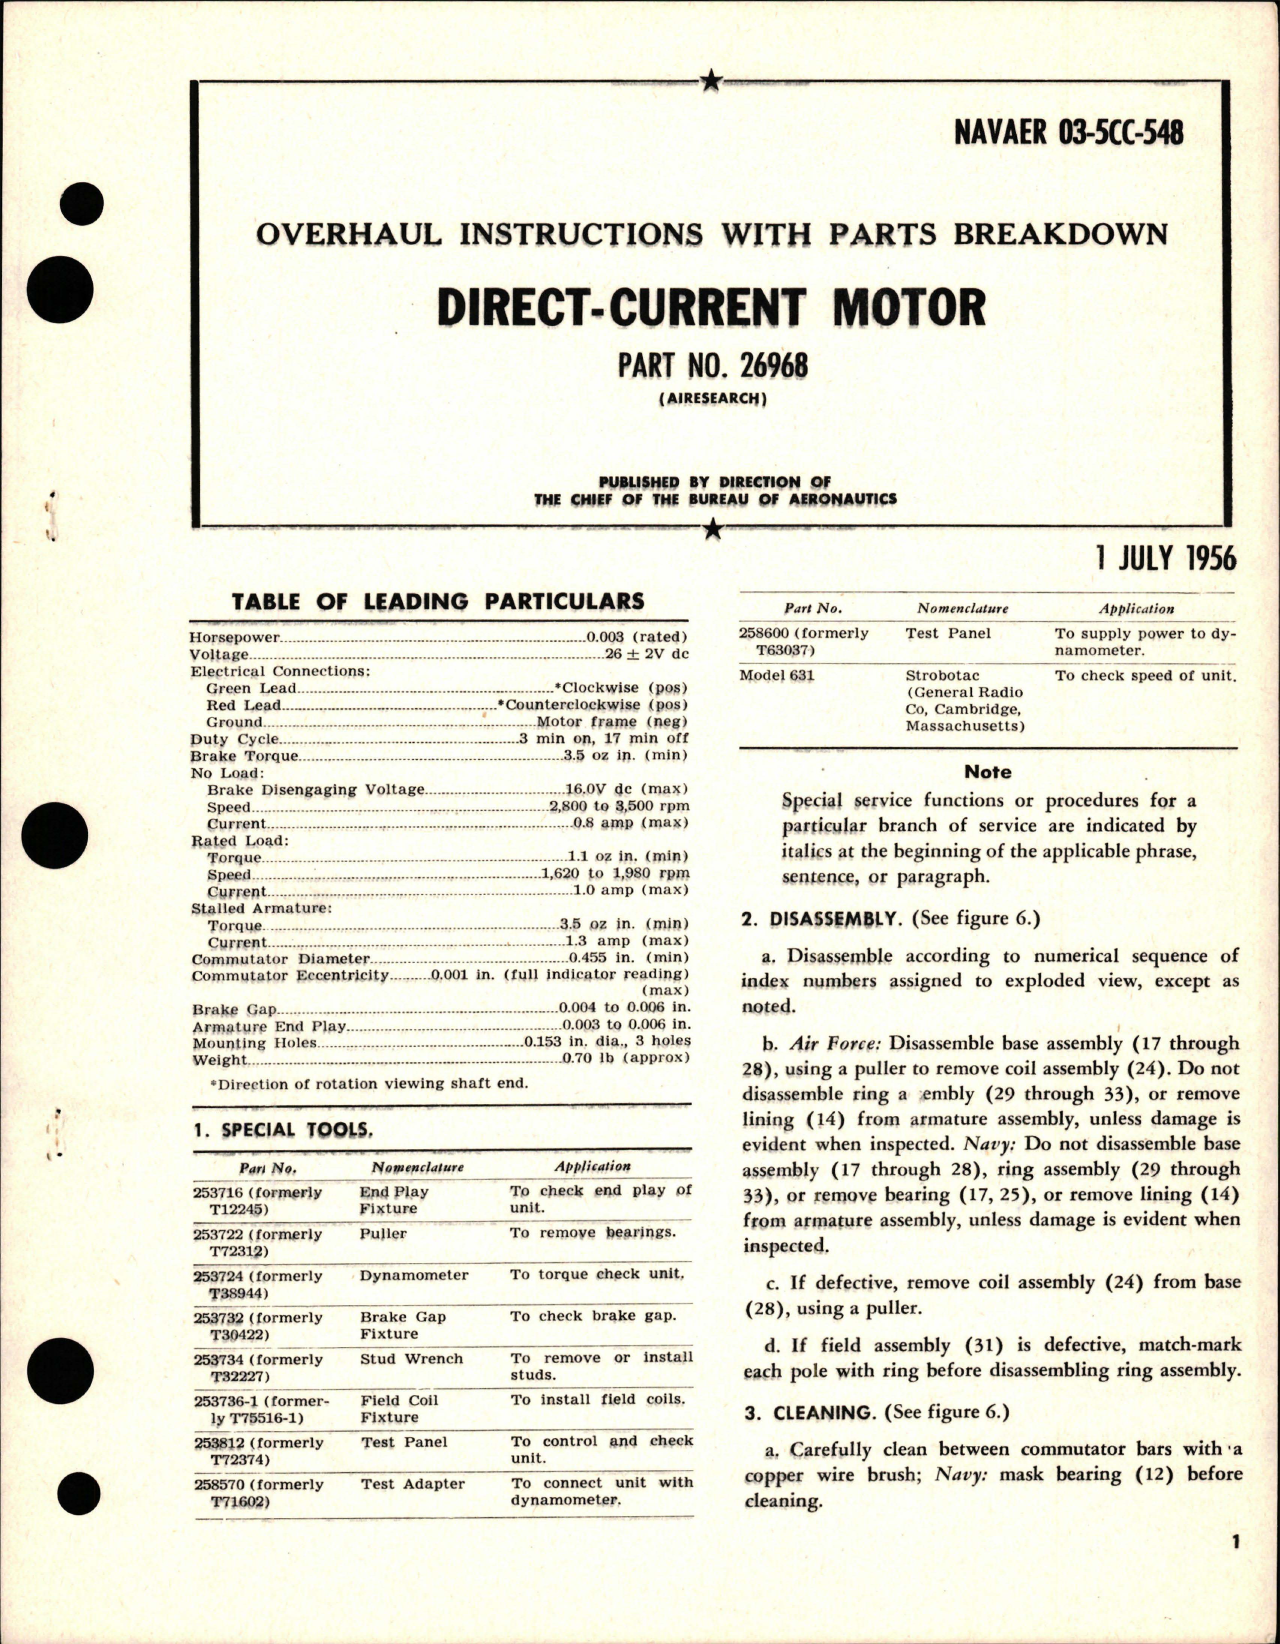 Sample page 1 from AirCorps Library document: Overhaul Instructions with Parts Breakdown for Direct-Current Motor - Part 26968 